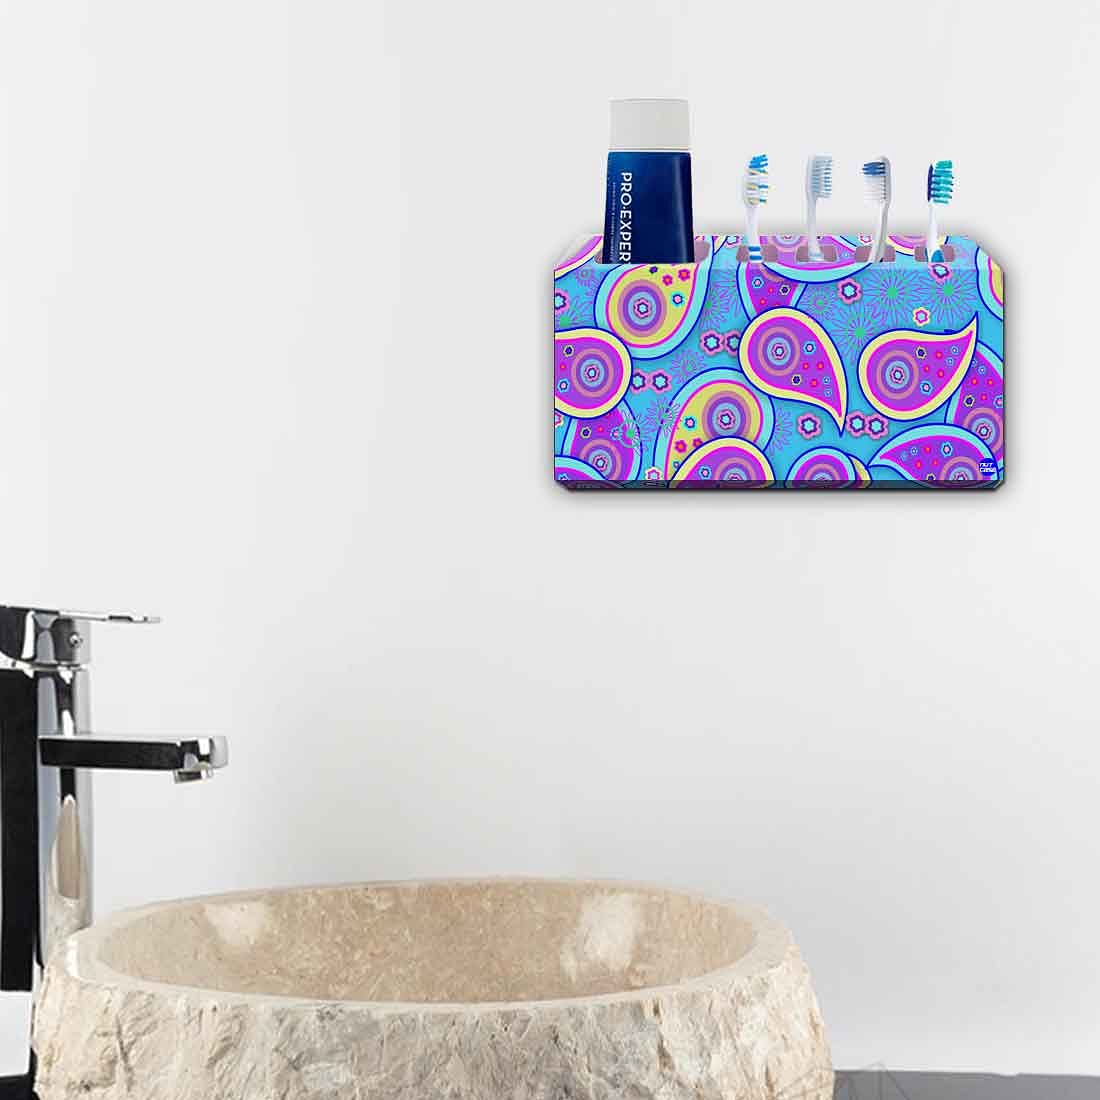 Toothbrush Holder Wall Mounted -Paisley Nutcase